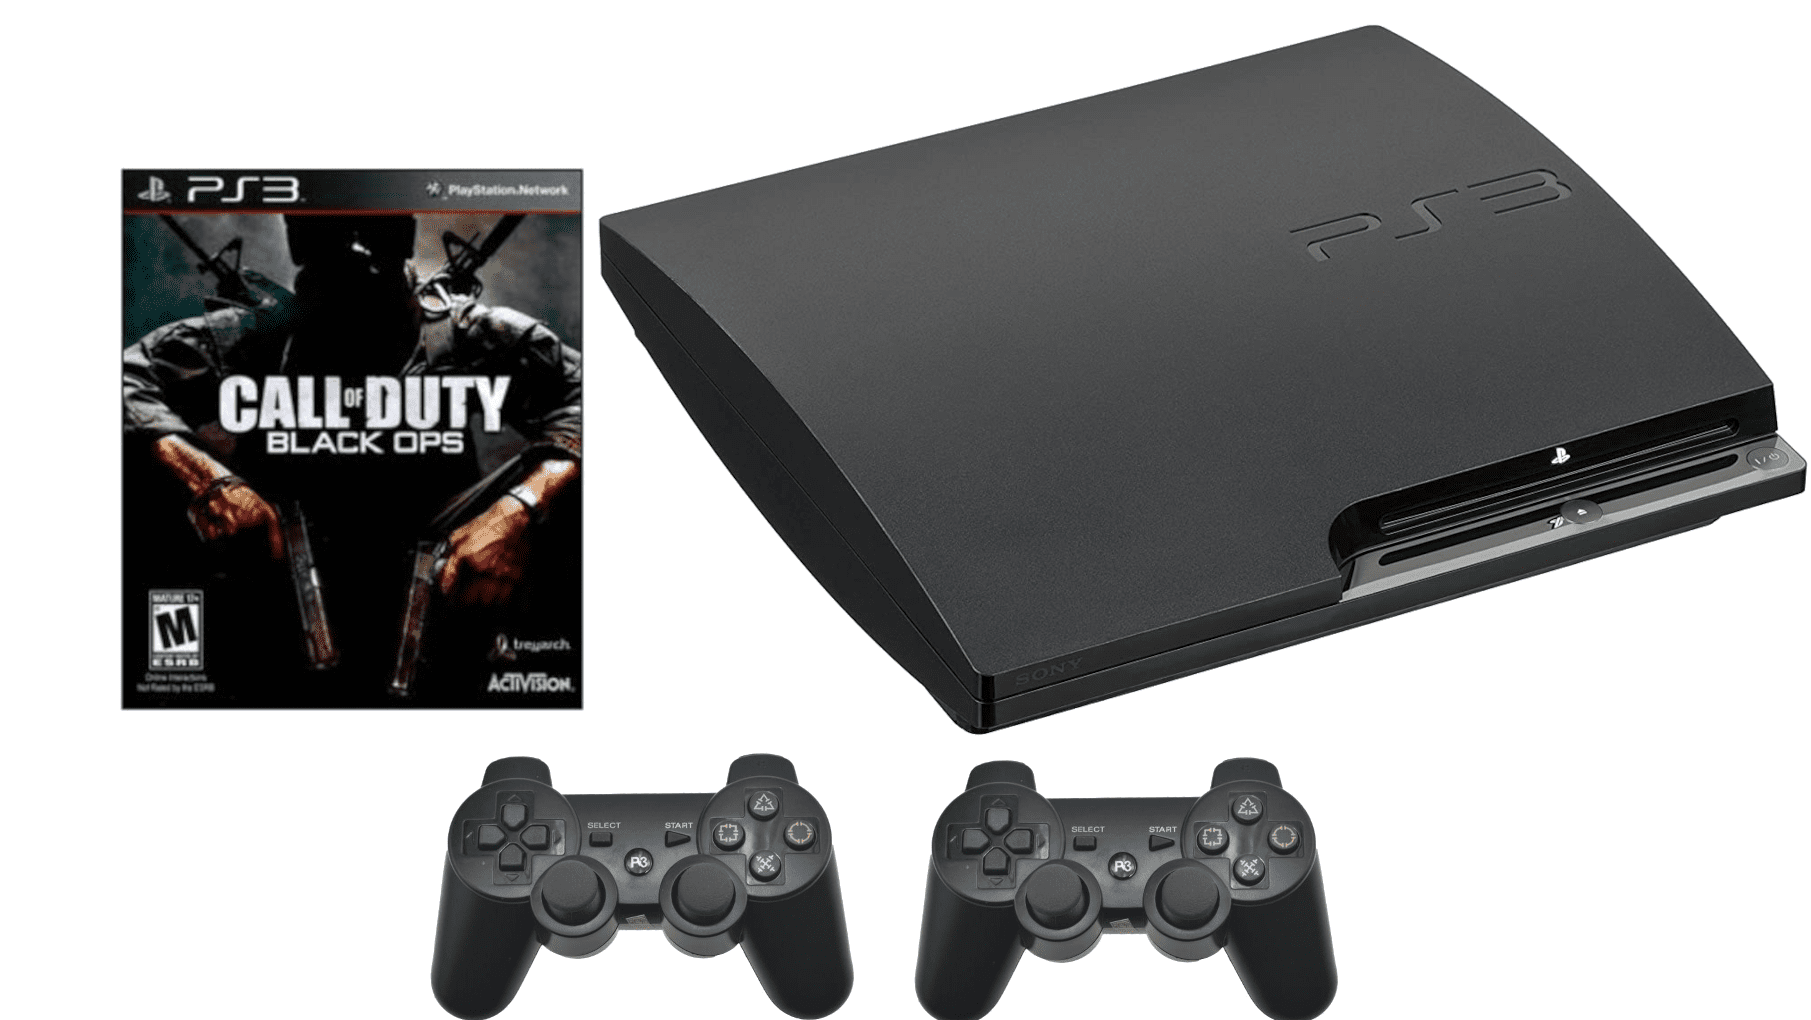 Console PS3 Slim 320 Go Sony + Call of Duty Black Ops + Pack de cartes -  Console PlayStation 3 Sony - Console rétrogaming - Achat & prix